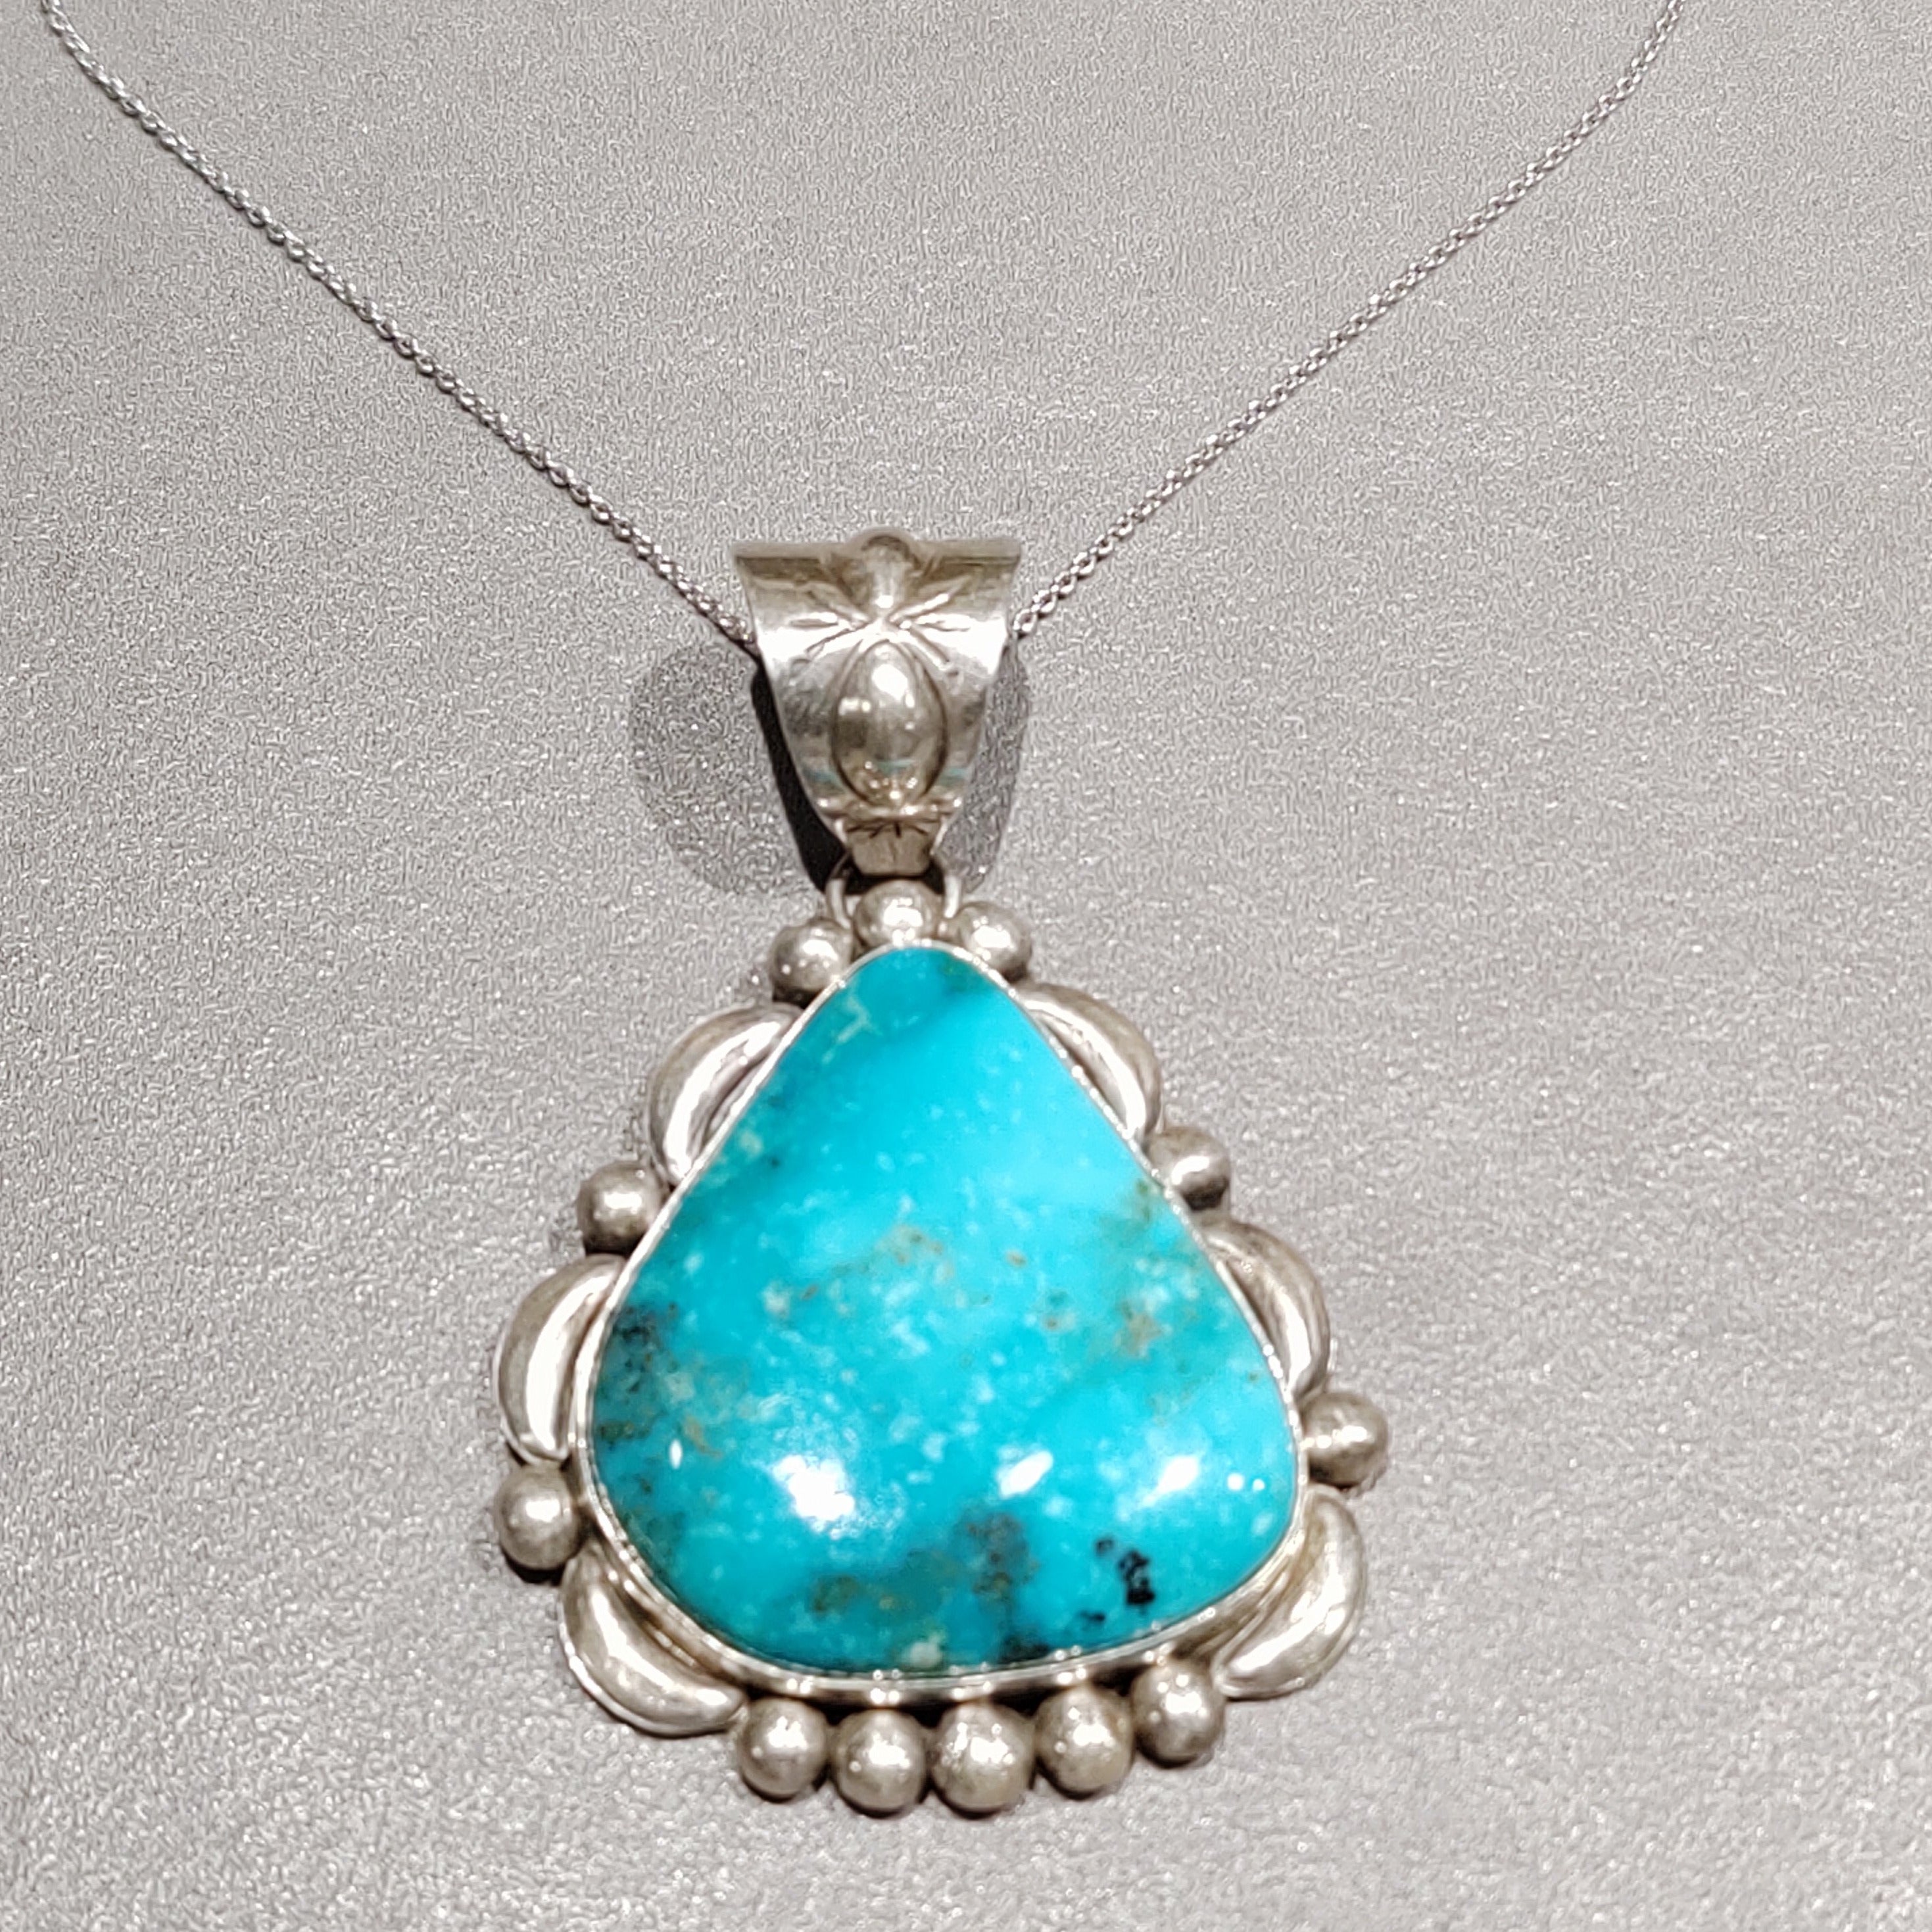 M. Spencer Navajo Sterling Silver Turquoise Pendant Sterling Chain - Handmade Native American